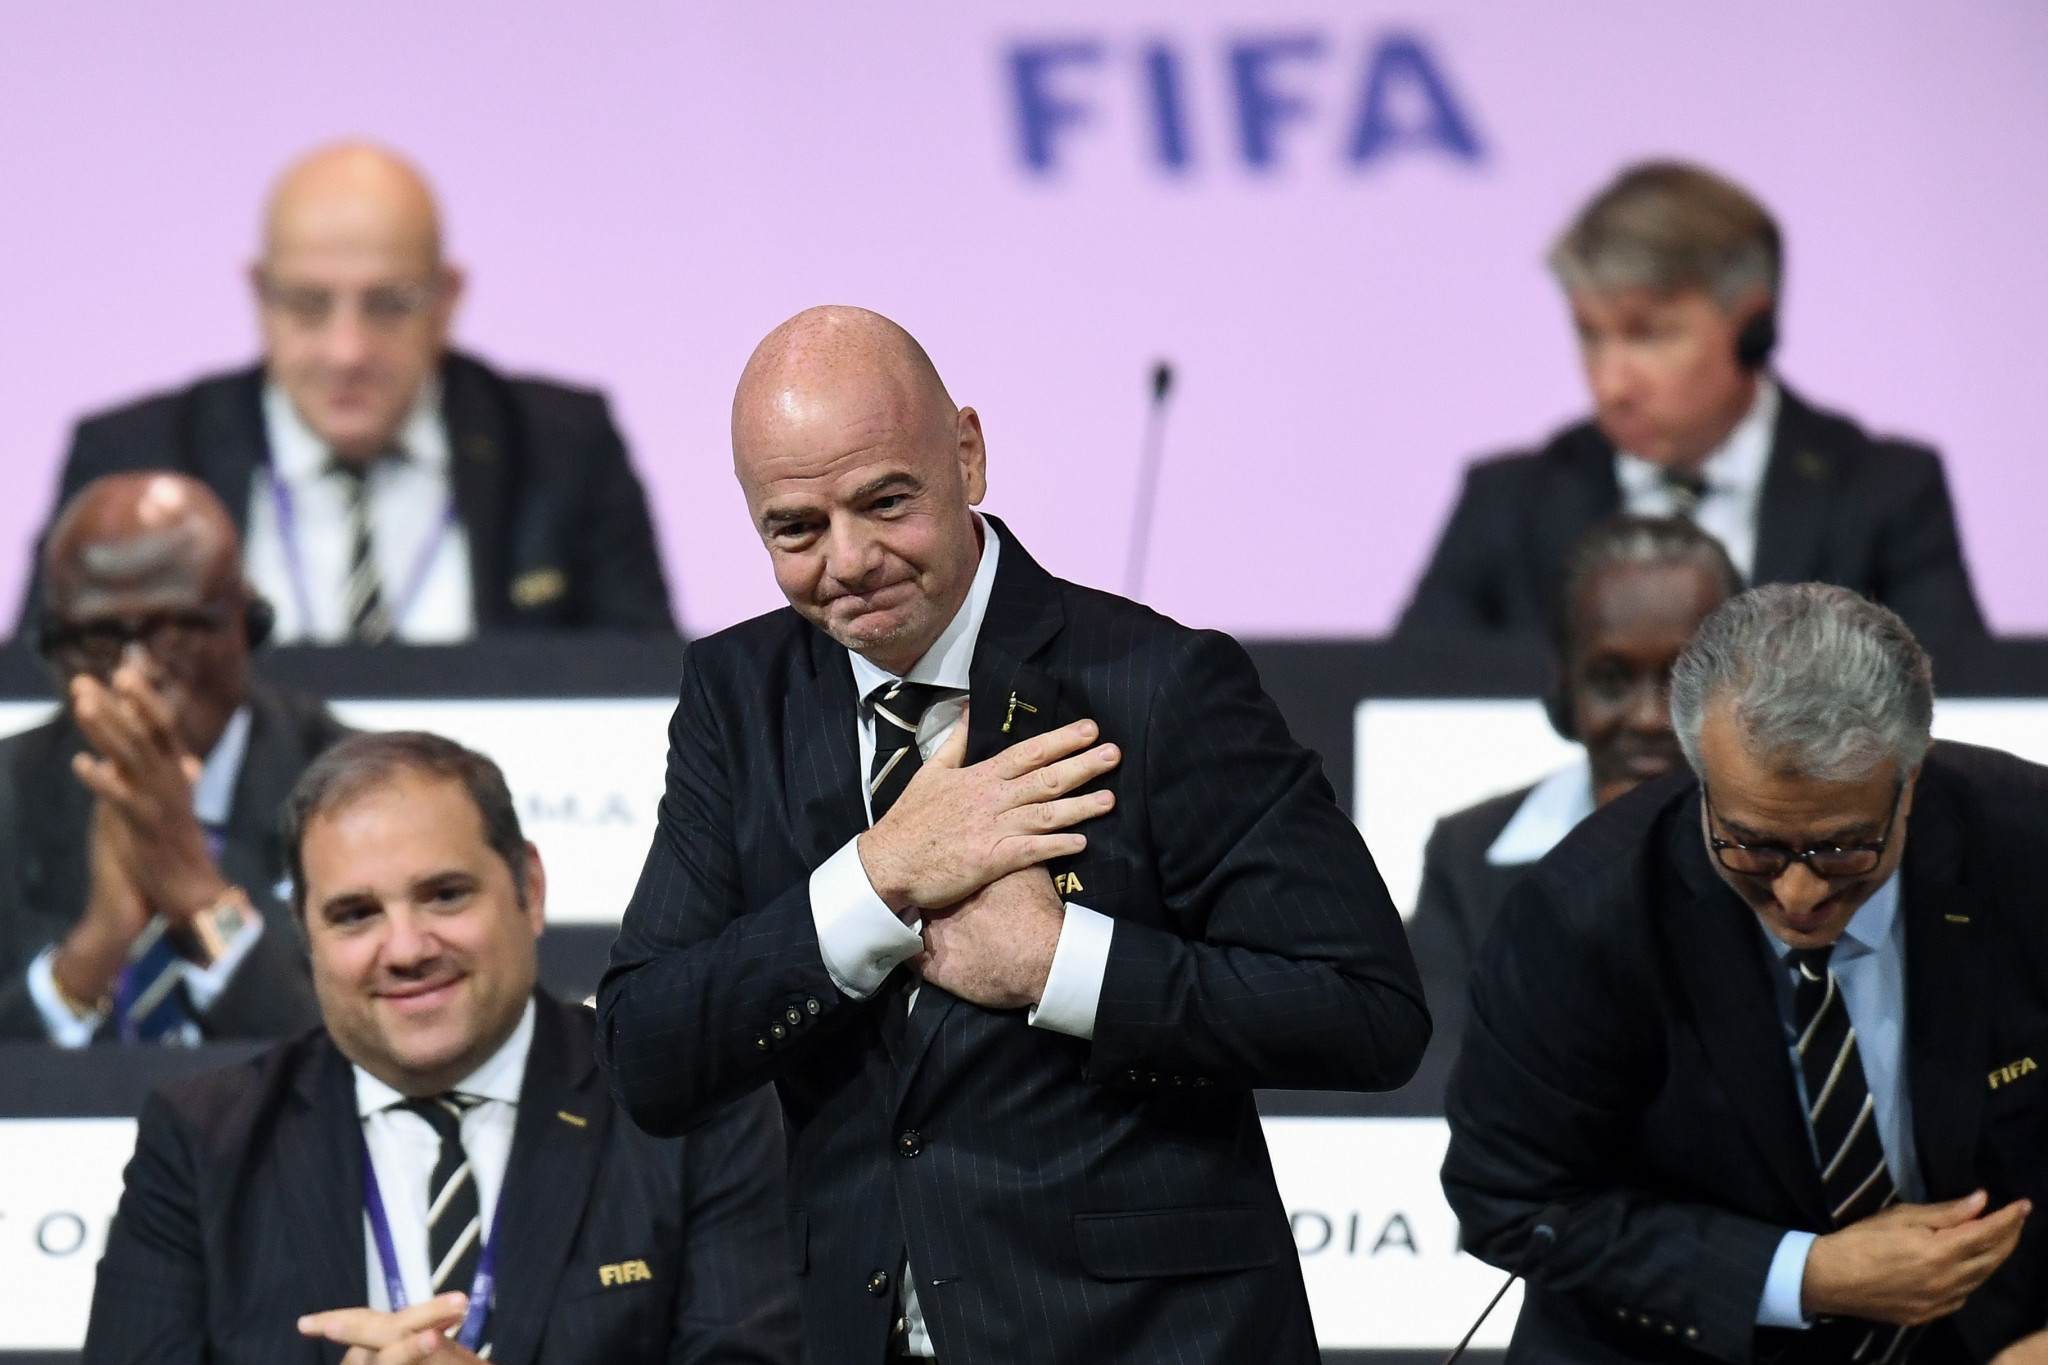 Corinne Blatter Andenmatten has hit out at FIFA President Gianni Infantino ©Getty Images